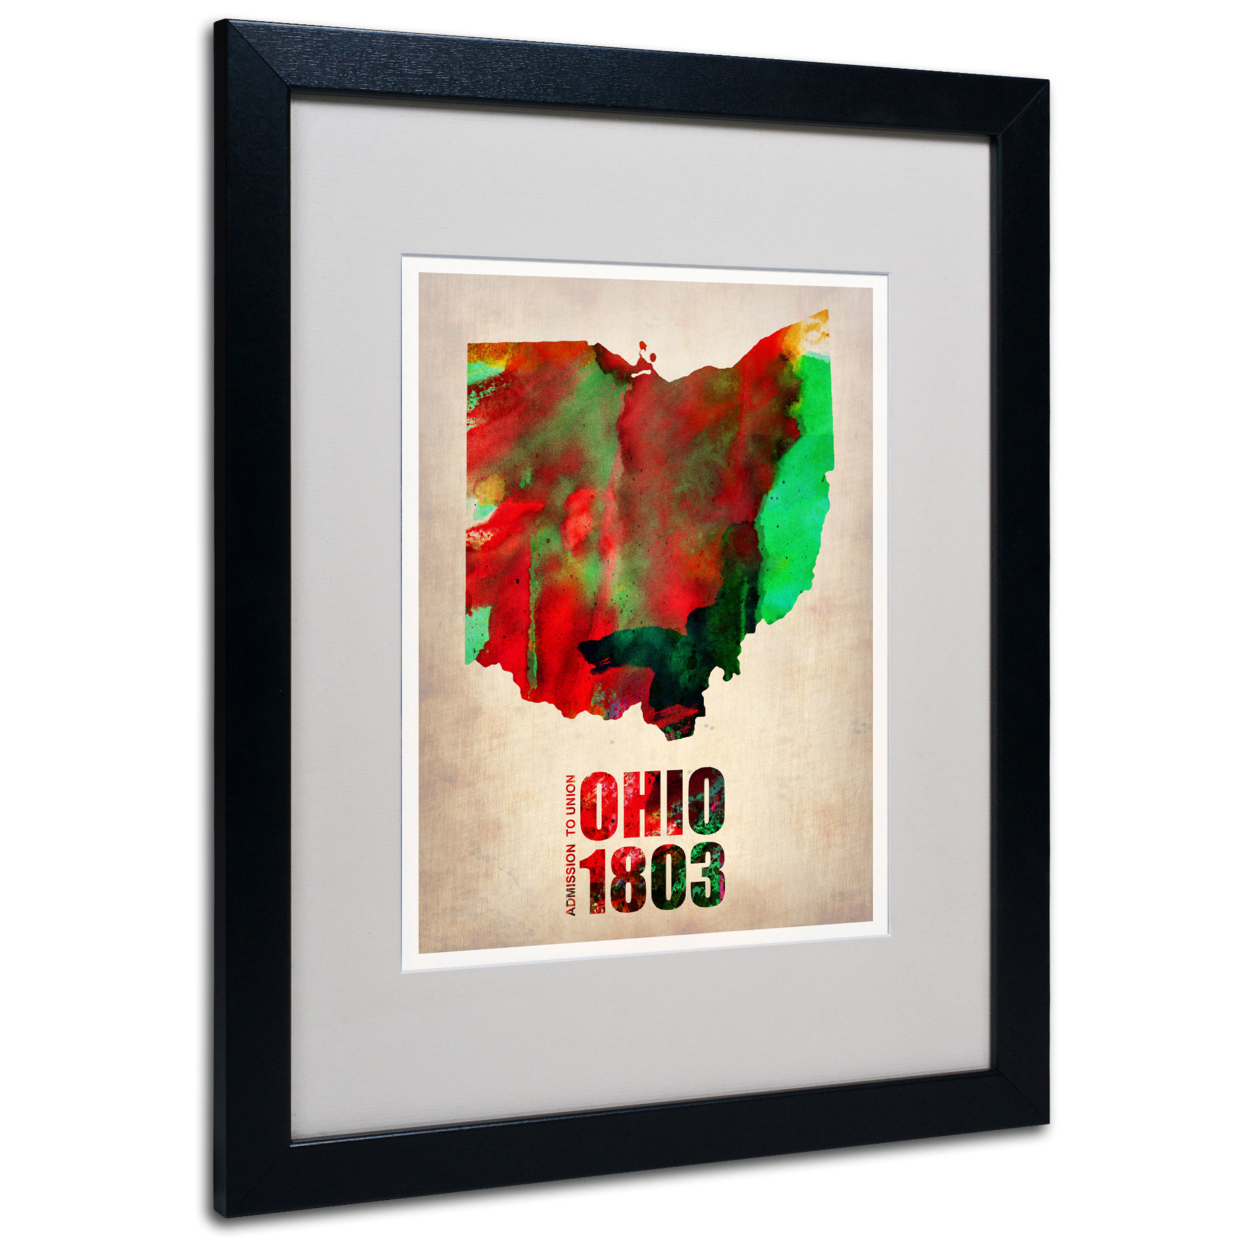 Naxart 'Ohio Watercolor Map' Black Wooden Framed Art 18 X 22 Inches